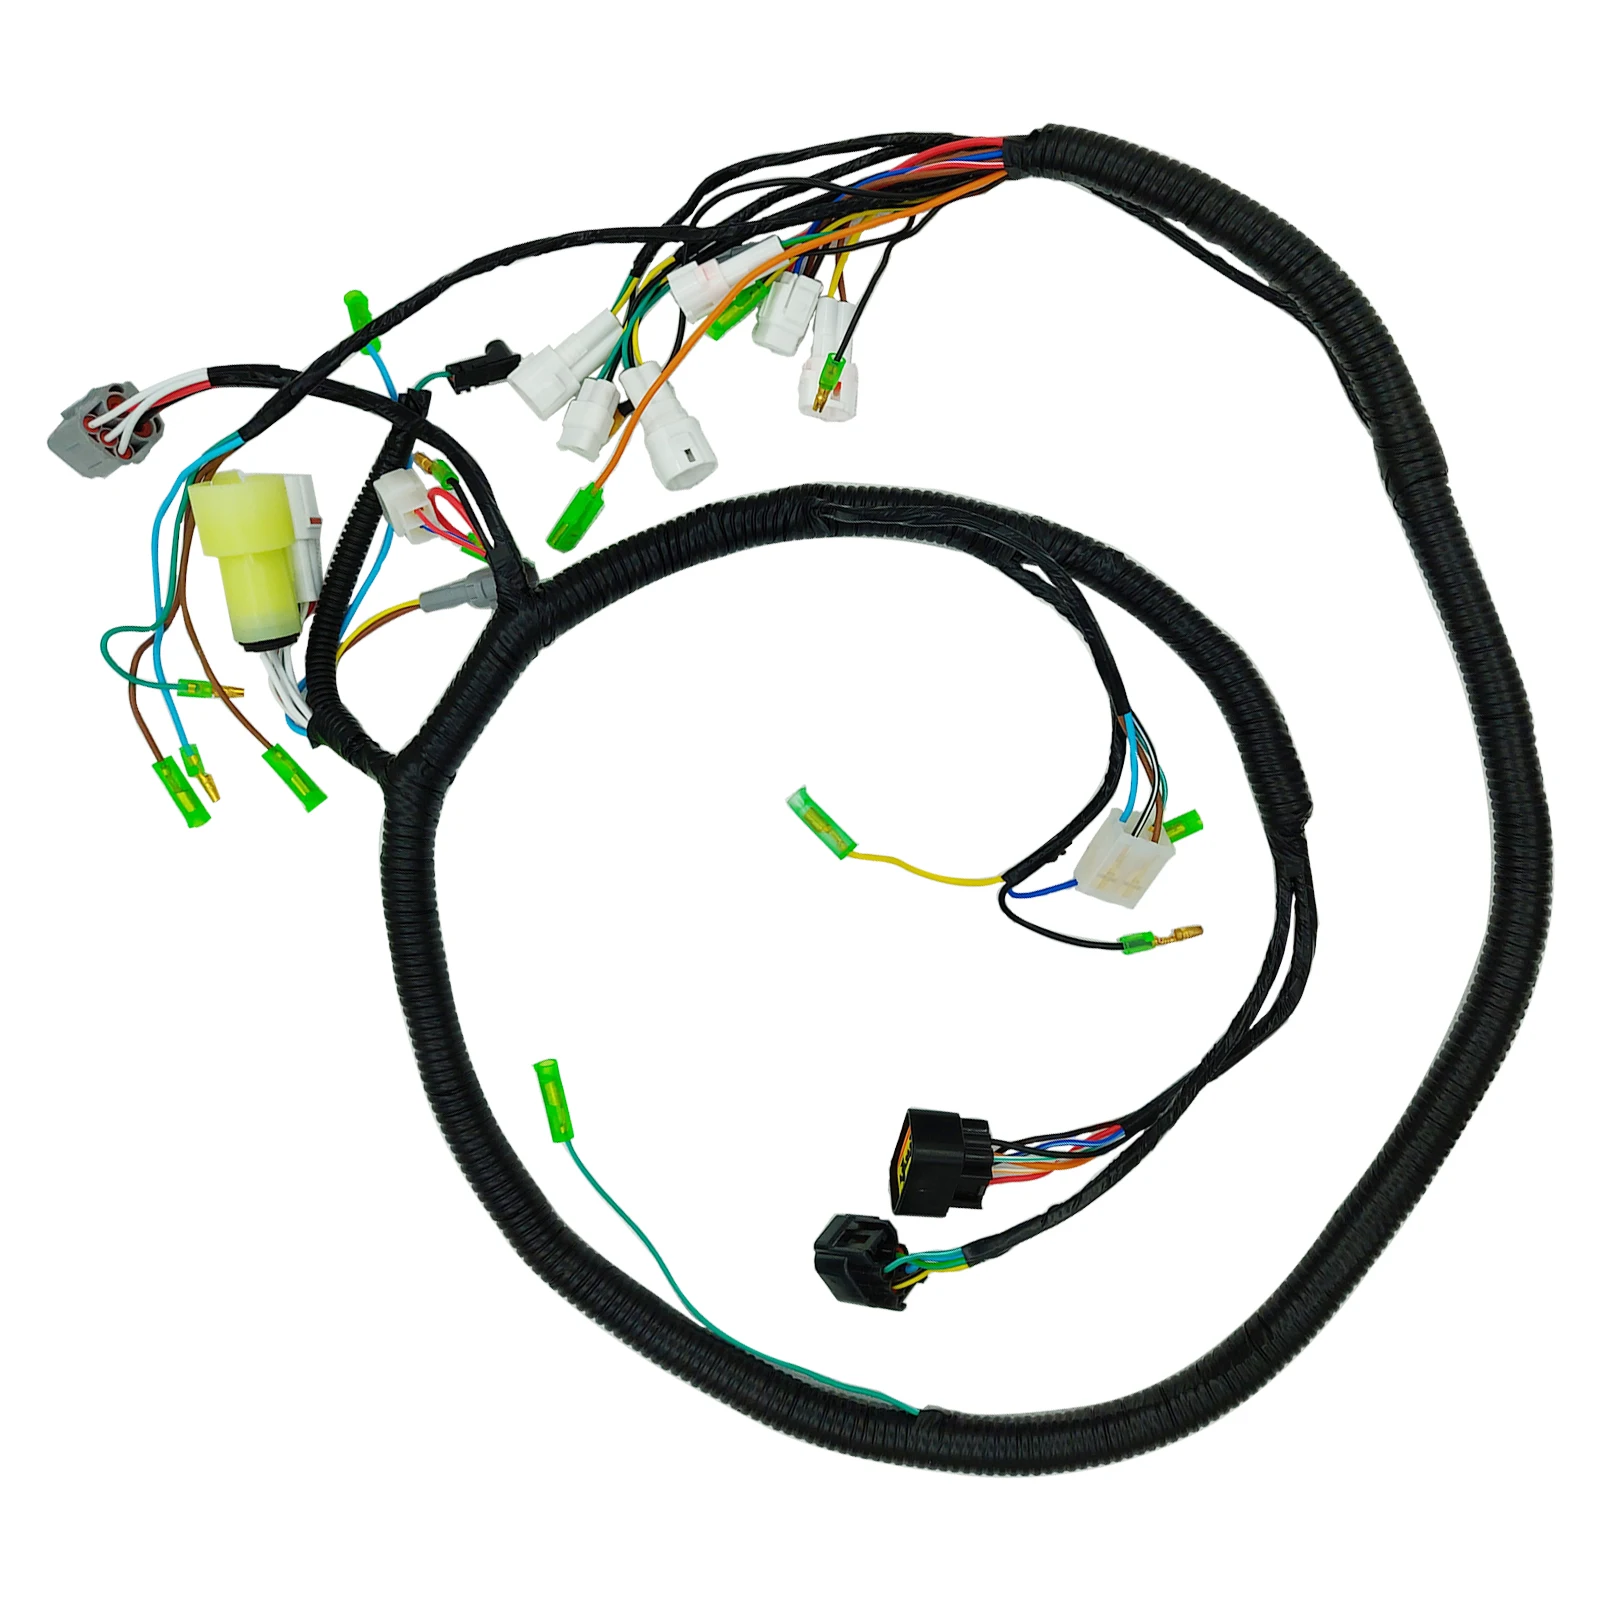 New Wire Harness Assembly Replace Parts Replacement for Yamaha Warrior 350 Yfm350x 2002-2004